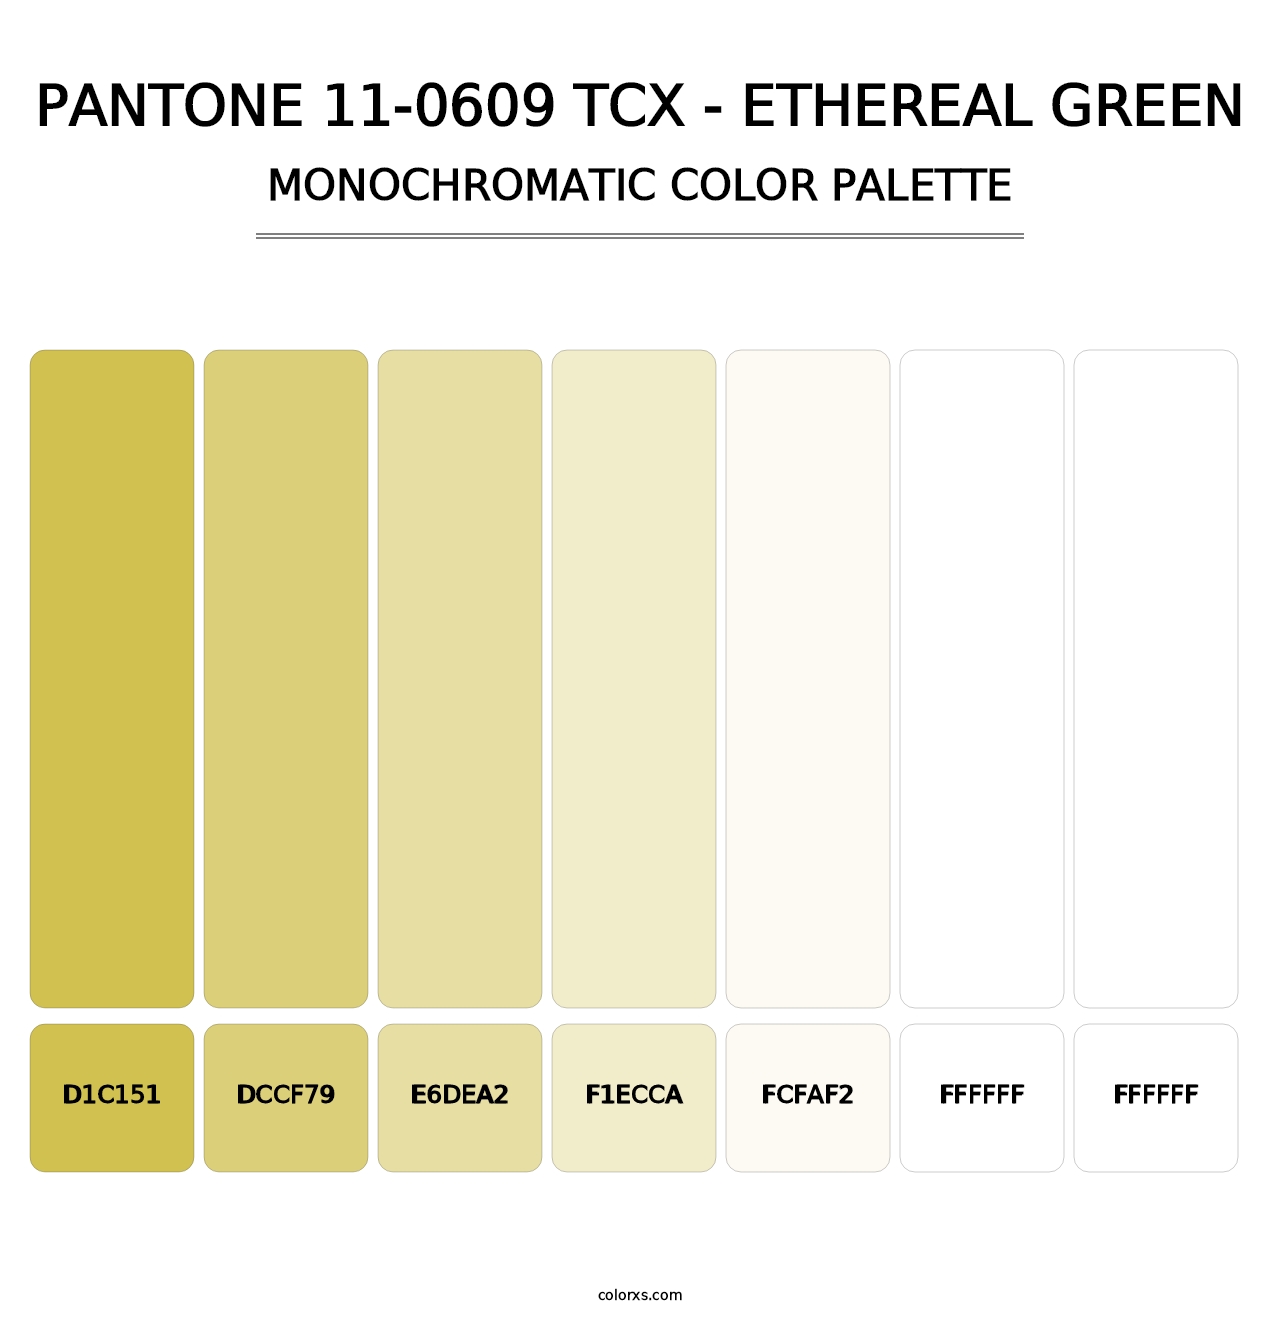 PANTONE 11-0609 TCX - Ethereal Green - Monochromatic Color Palette